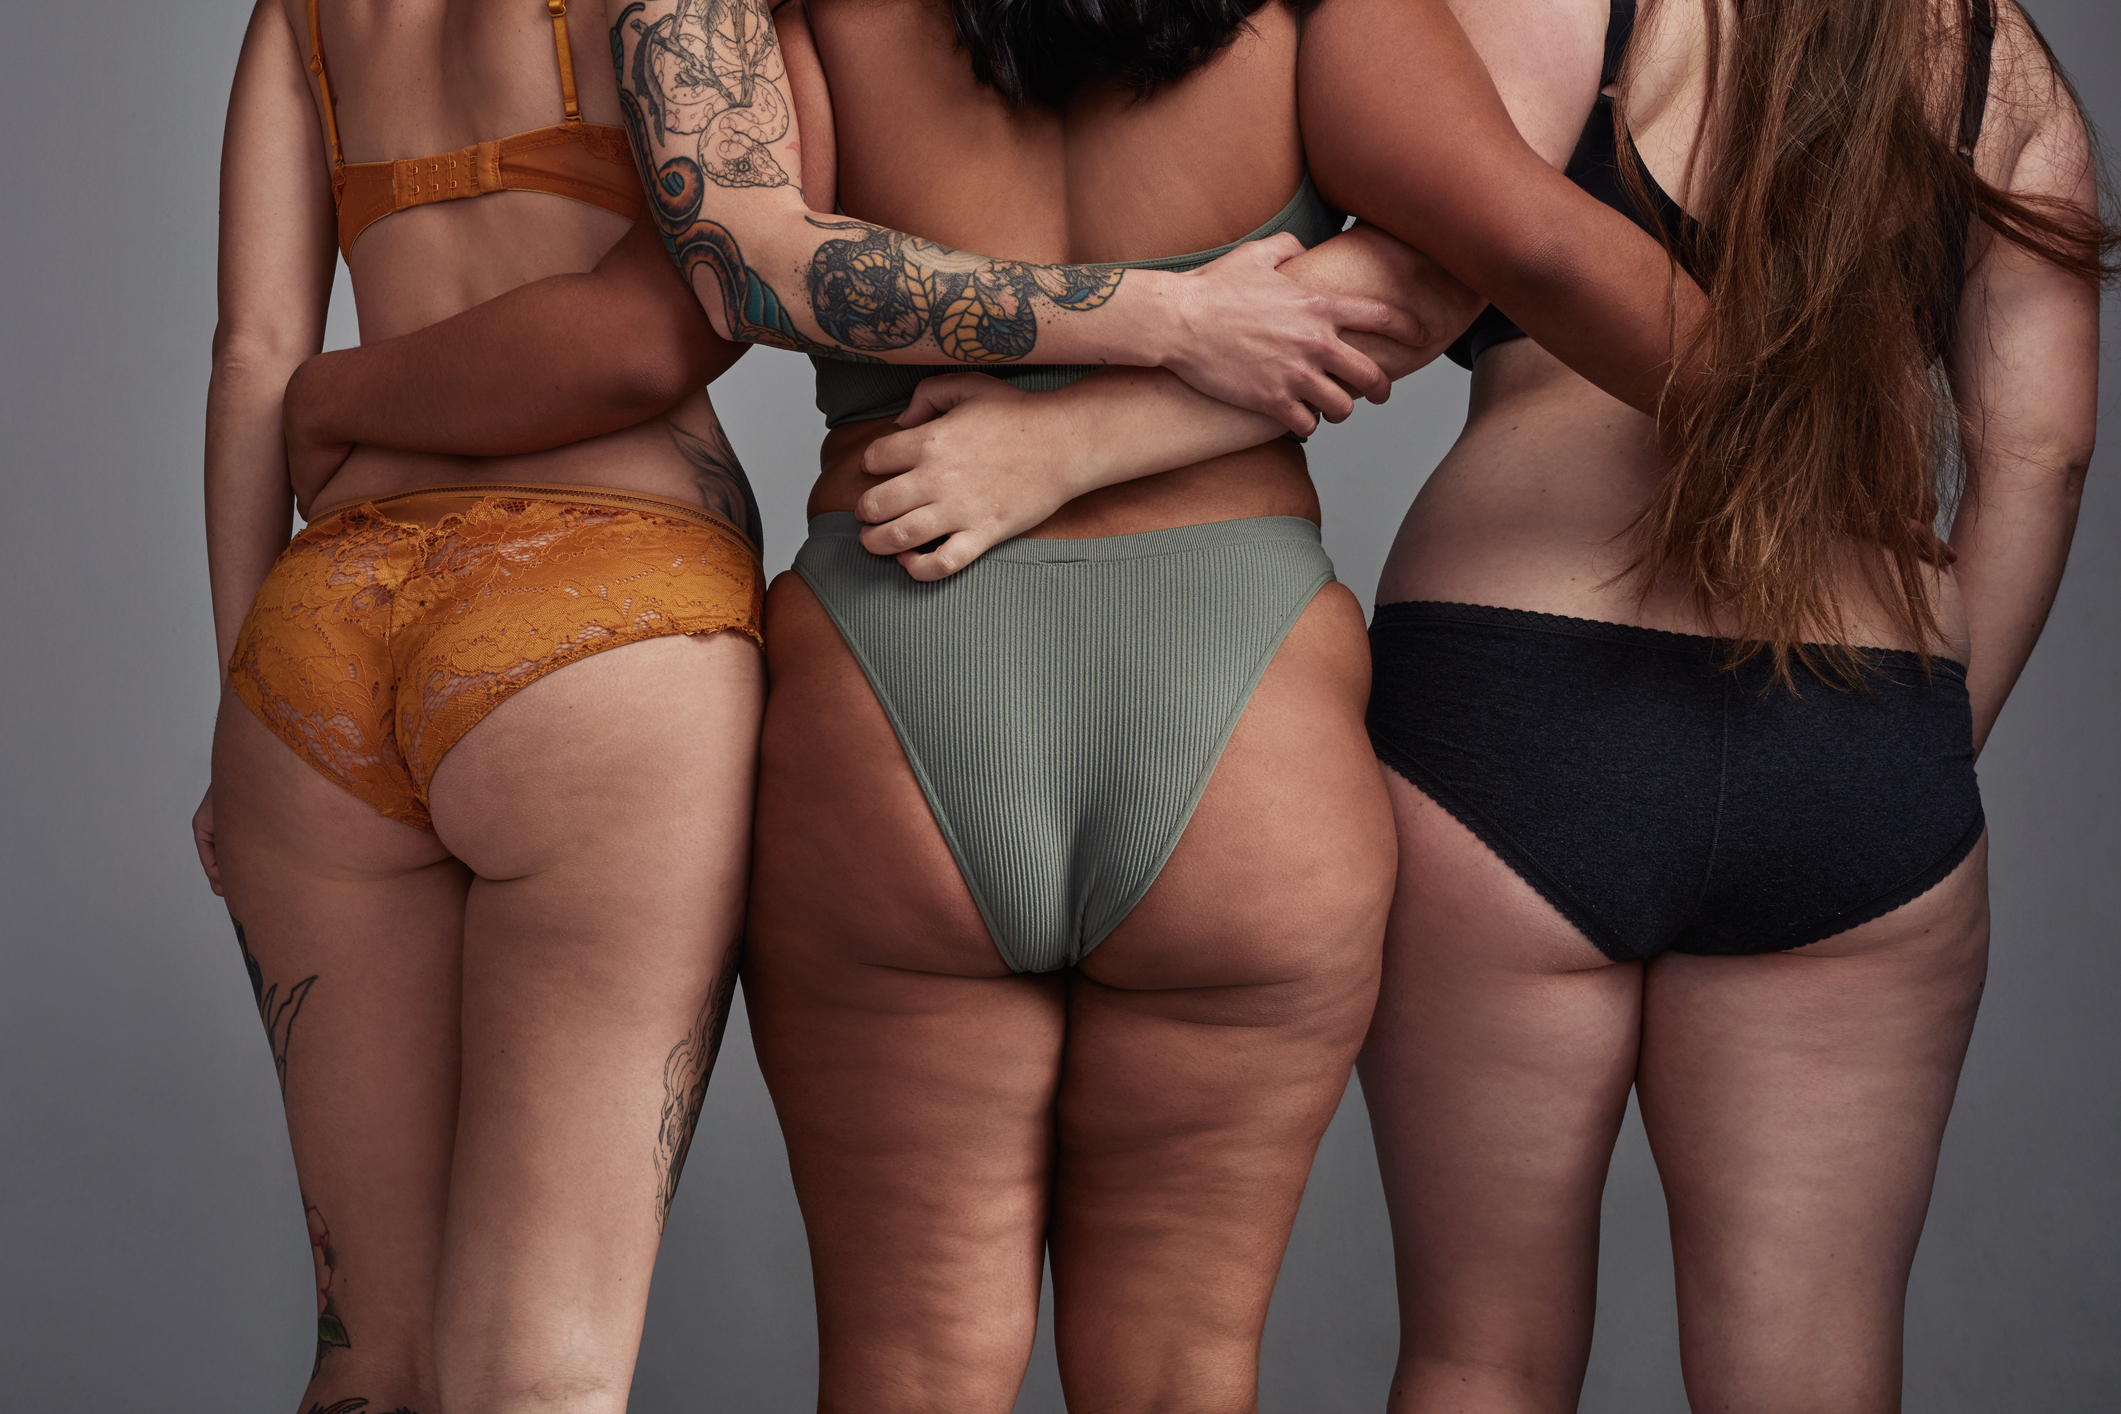 Three individuals standing close, showcasing diverse body types in undergarments, with a focus on body positivity and inclusivity